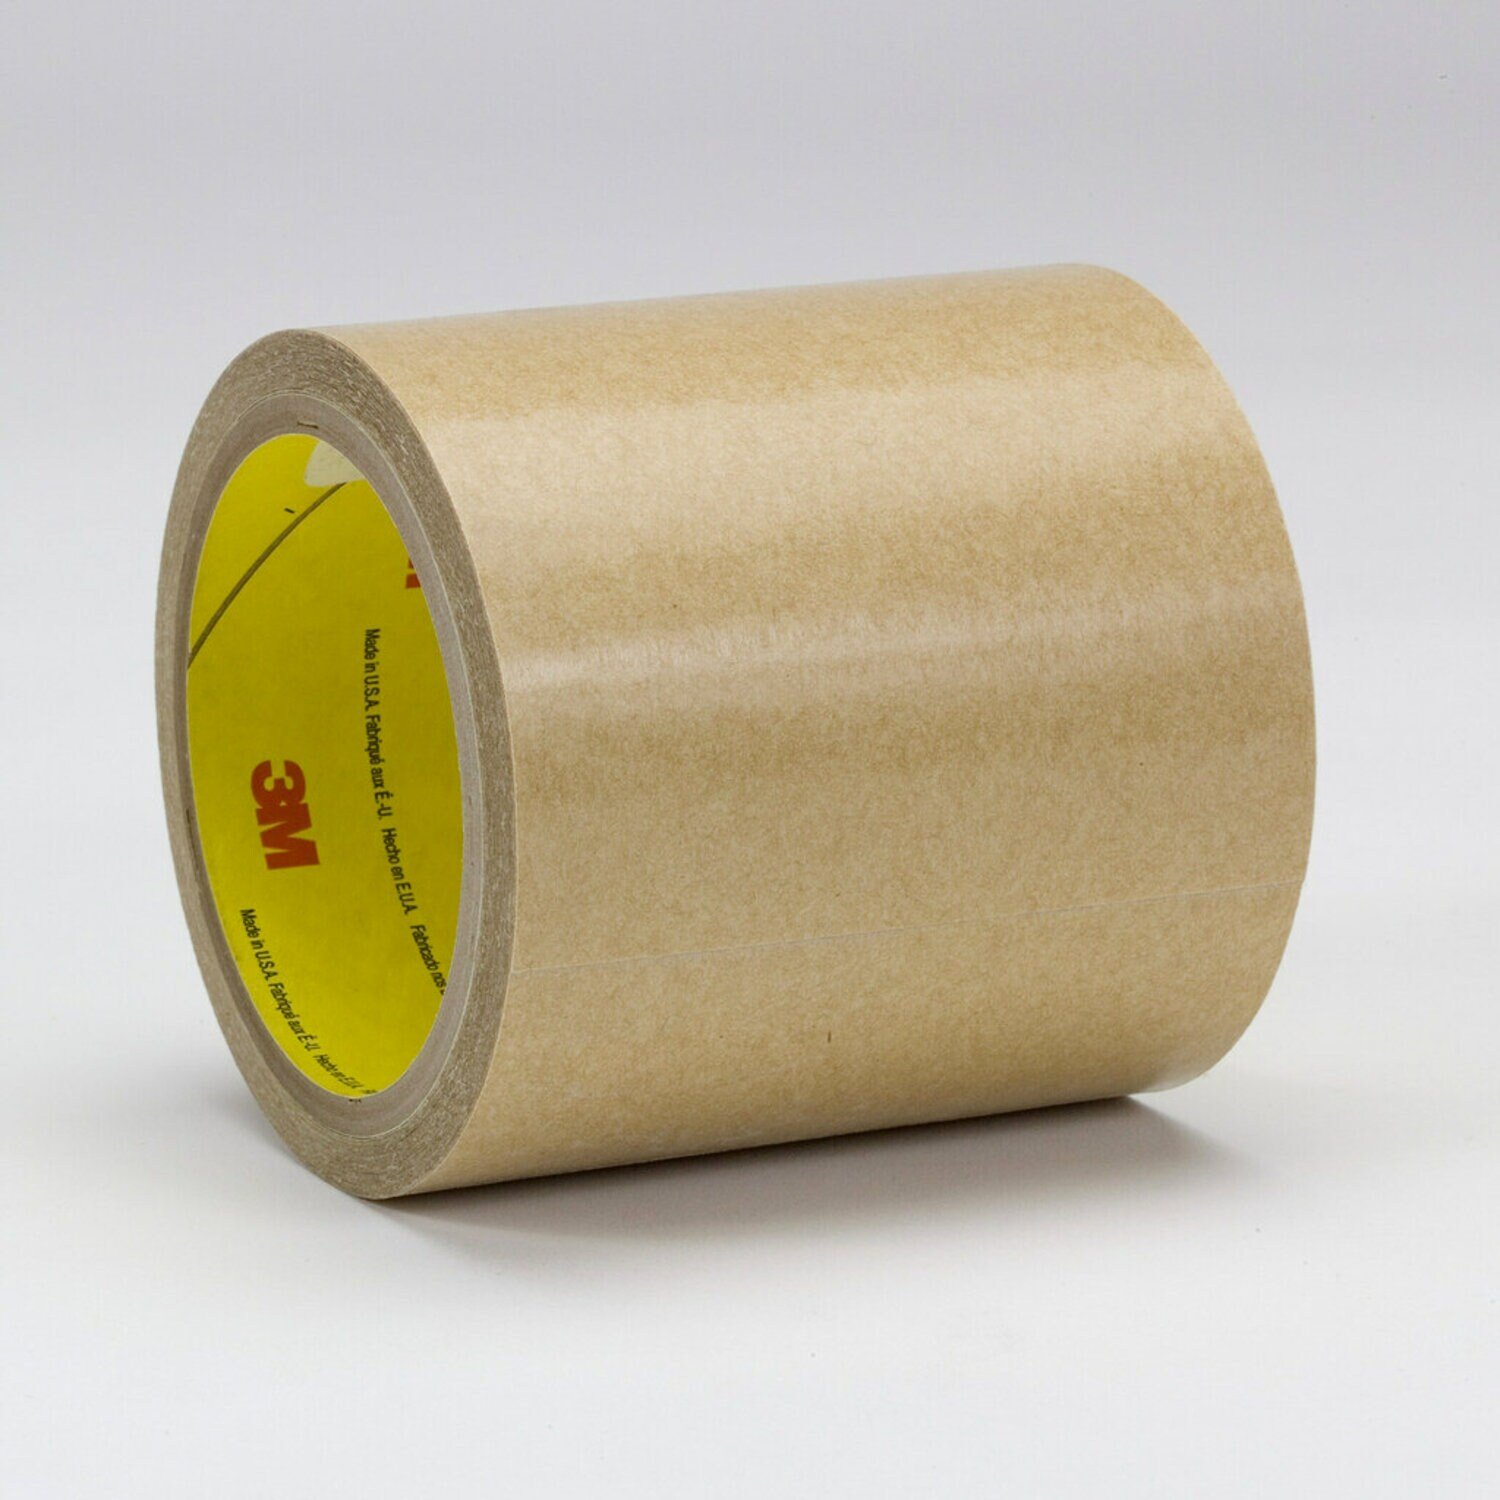 7010334401 - 3M Adhesive Transfer Tape 950, Clear, 1 in x 180 yd, 5 Mil, 9/Case